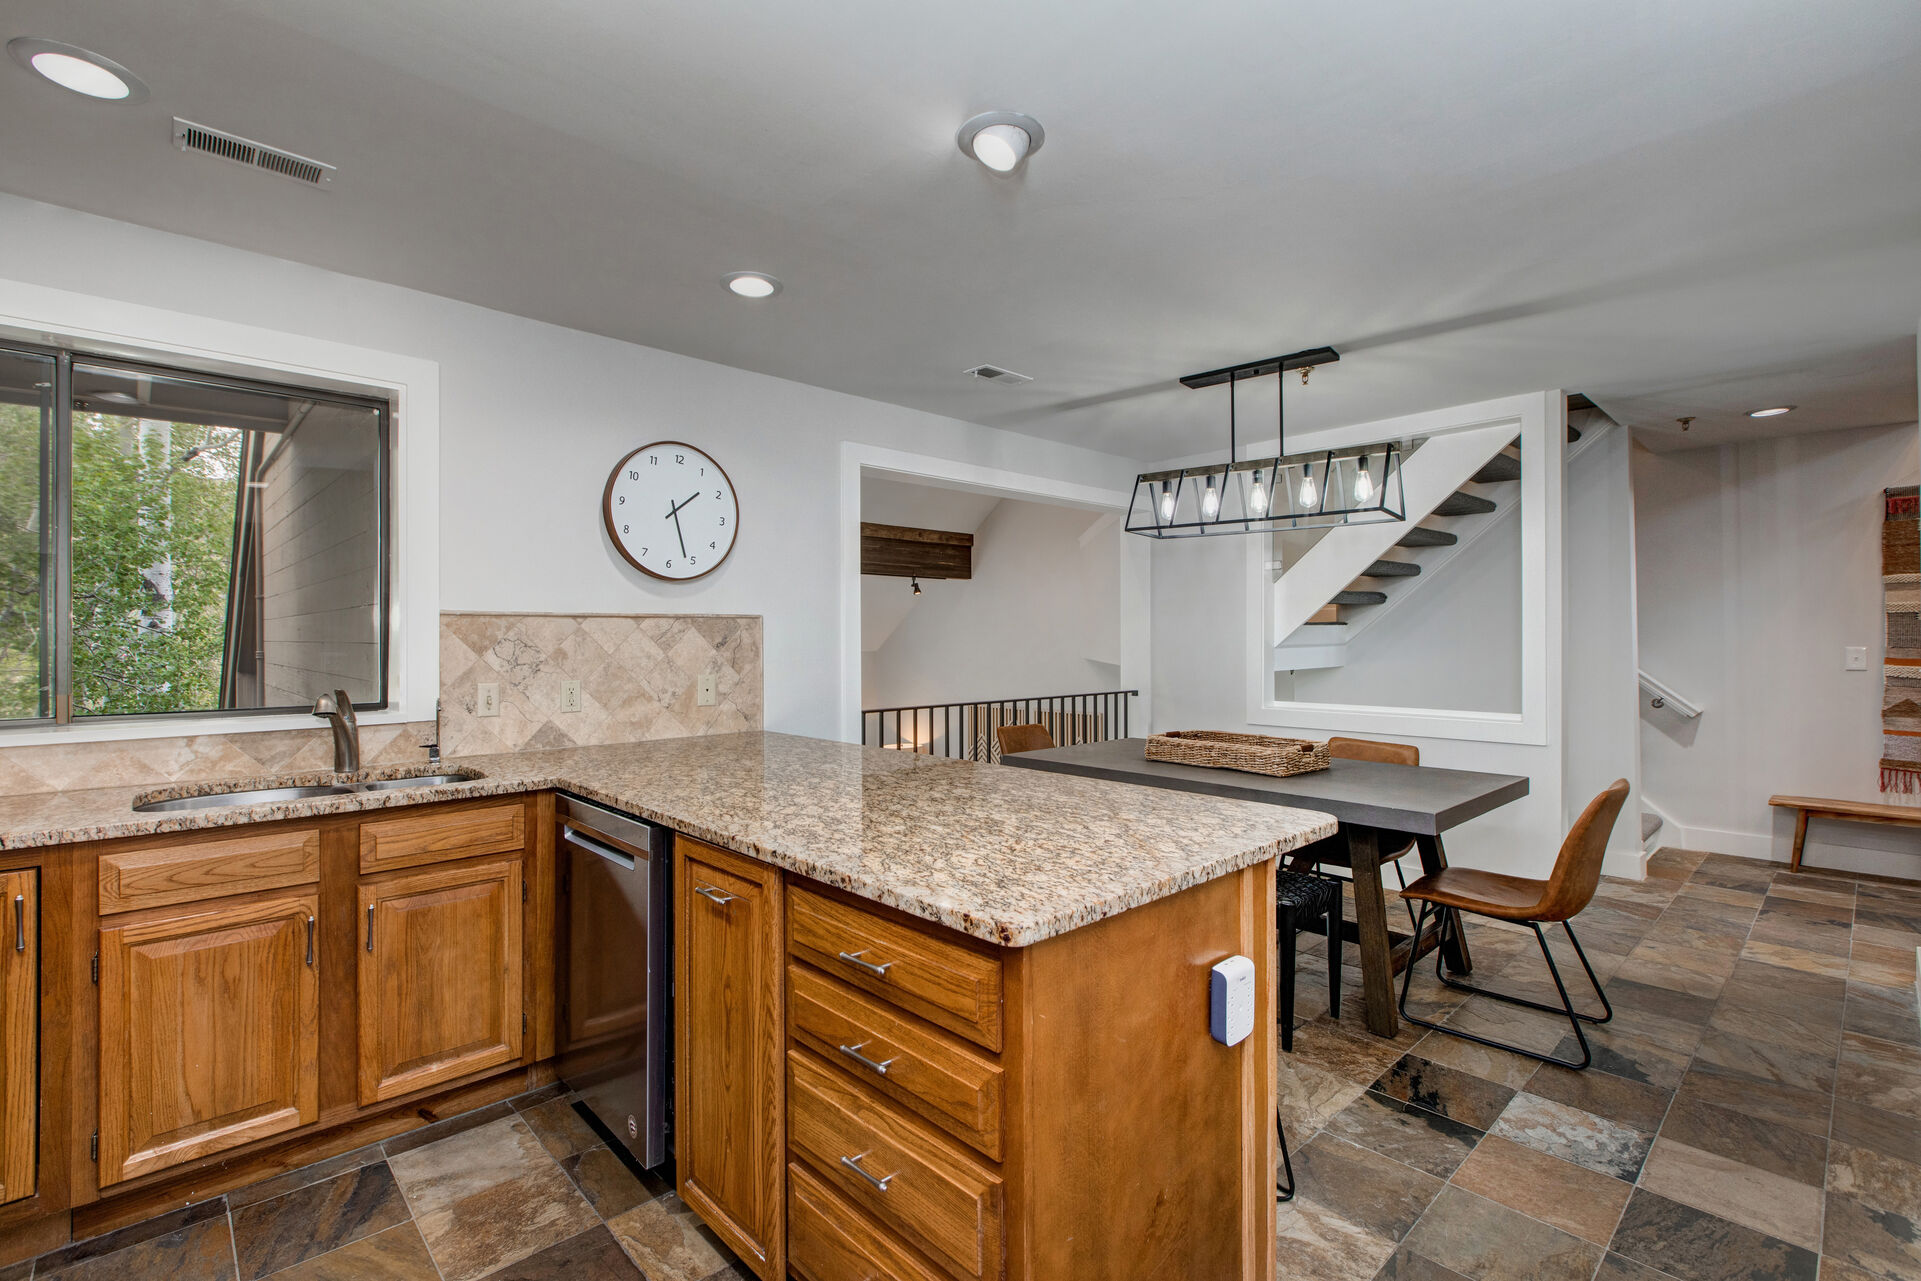 Kitchen with stone countertops, stainless steel appliances, bar seating for four, and garage and laundry room access